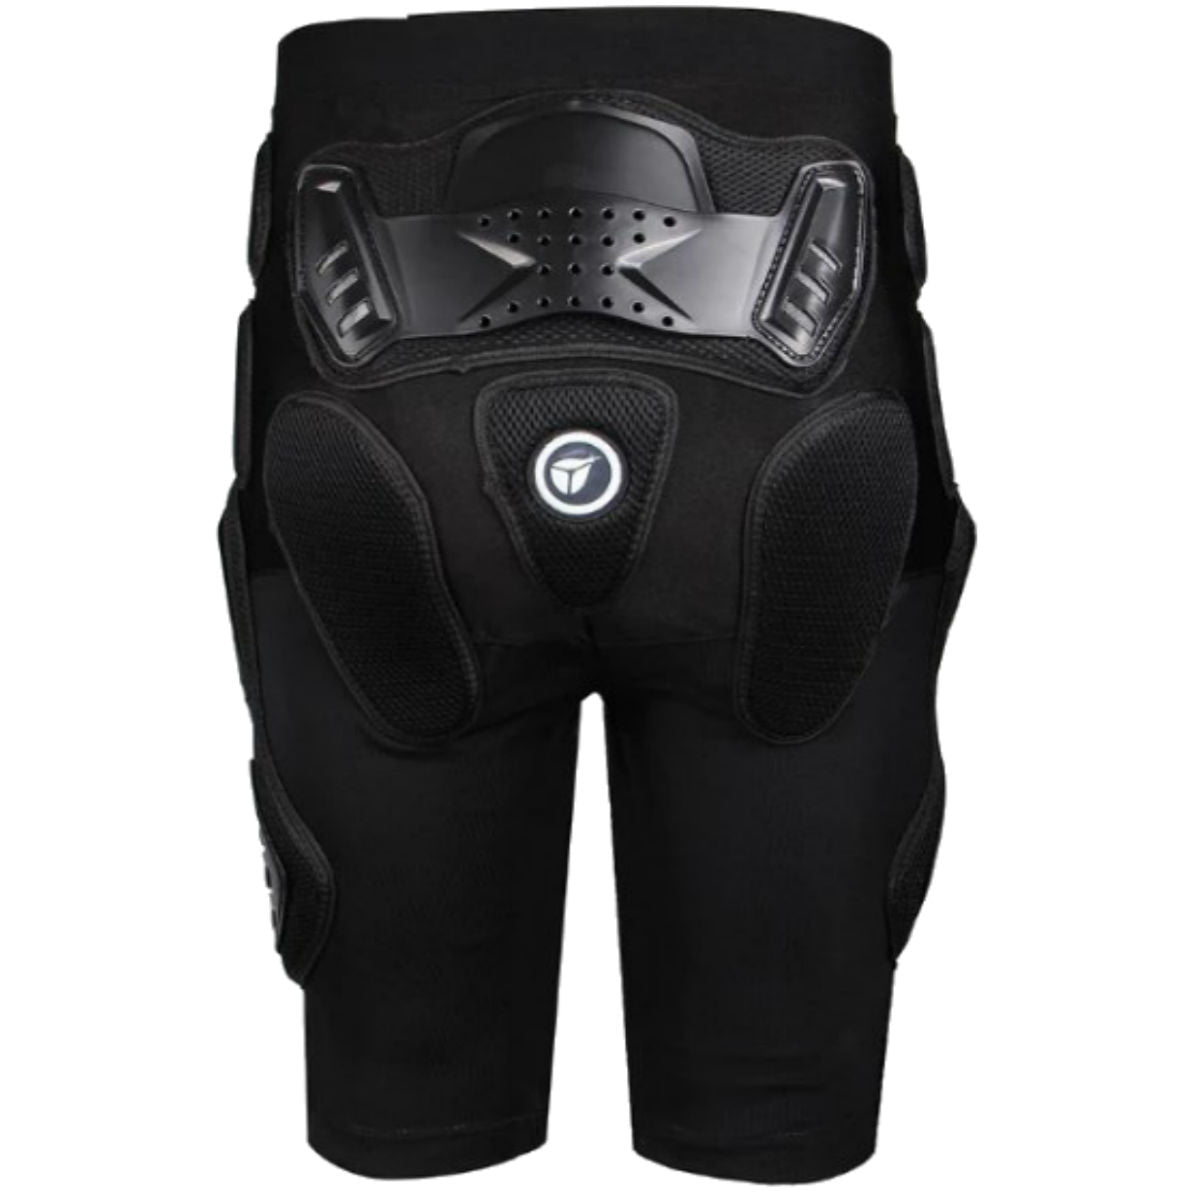 The back view of Motorcycle Protective Armor Pants for Men & Women with knee pads.